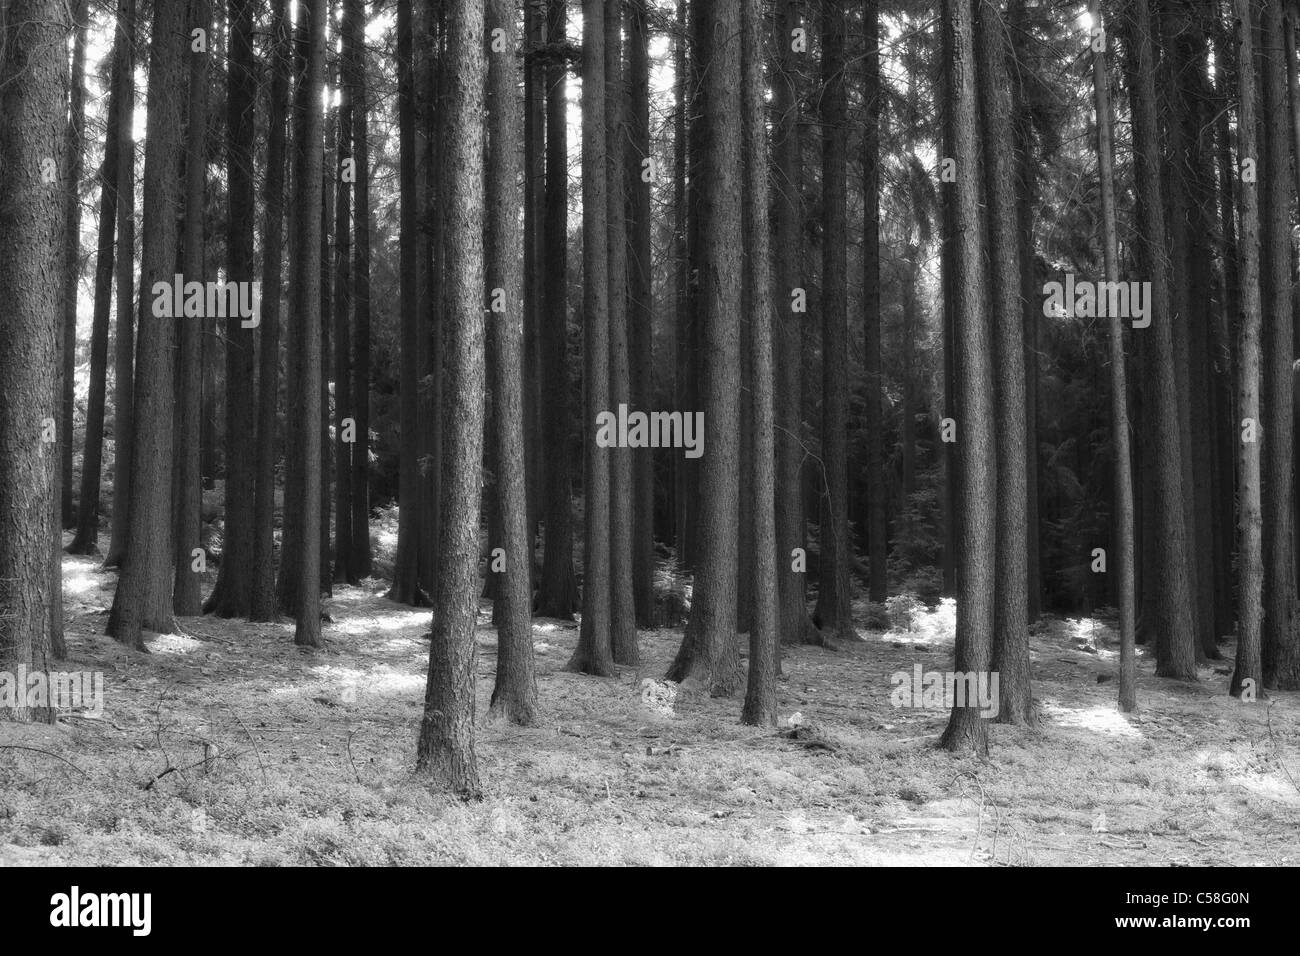 Czech republic, day, daytime, forest, haven, horizontal, monochrome, natural, nature, outdoor, outdoors, outside, peace, peacefu Stock Photo